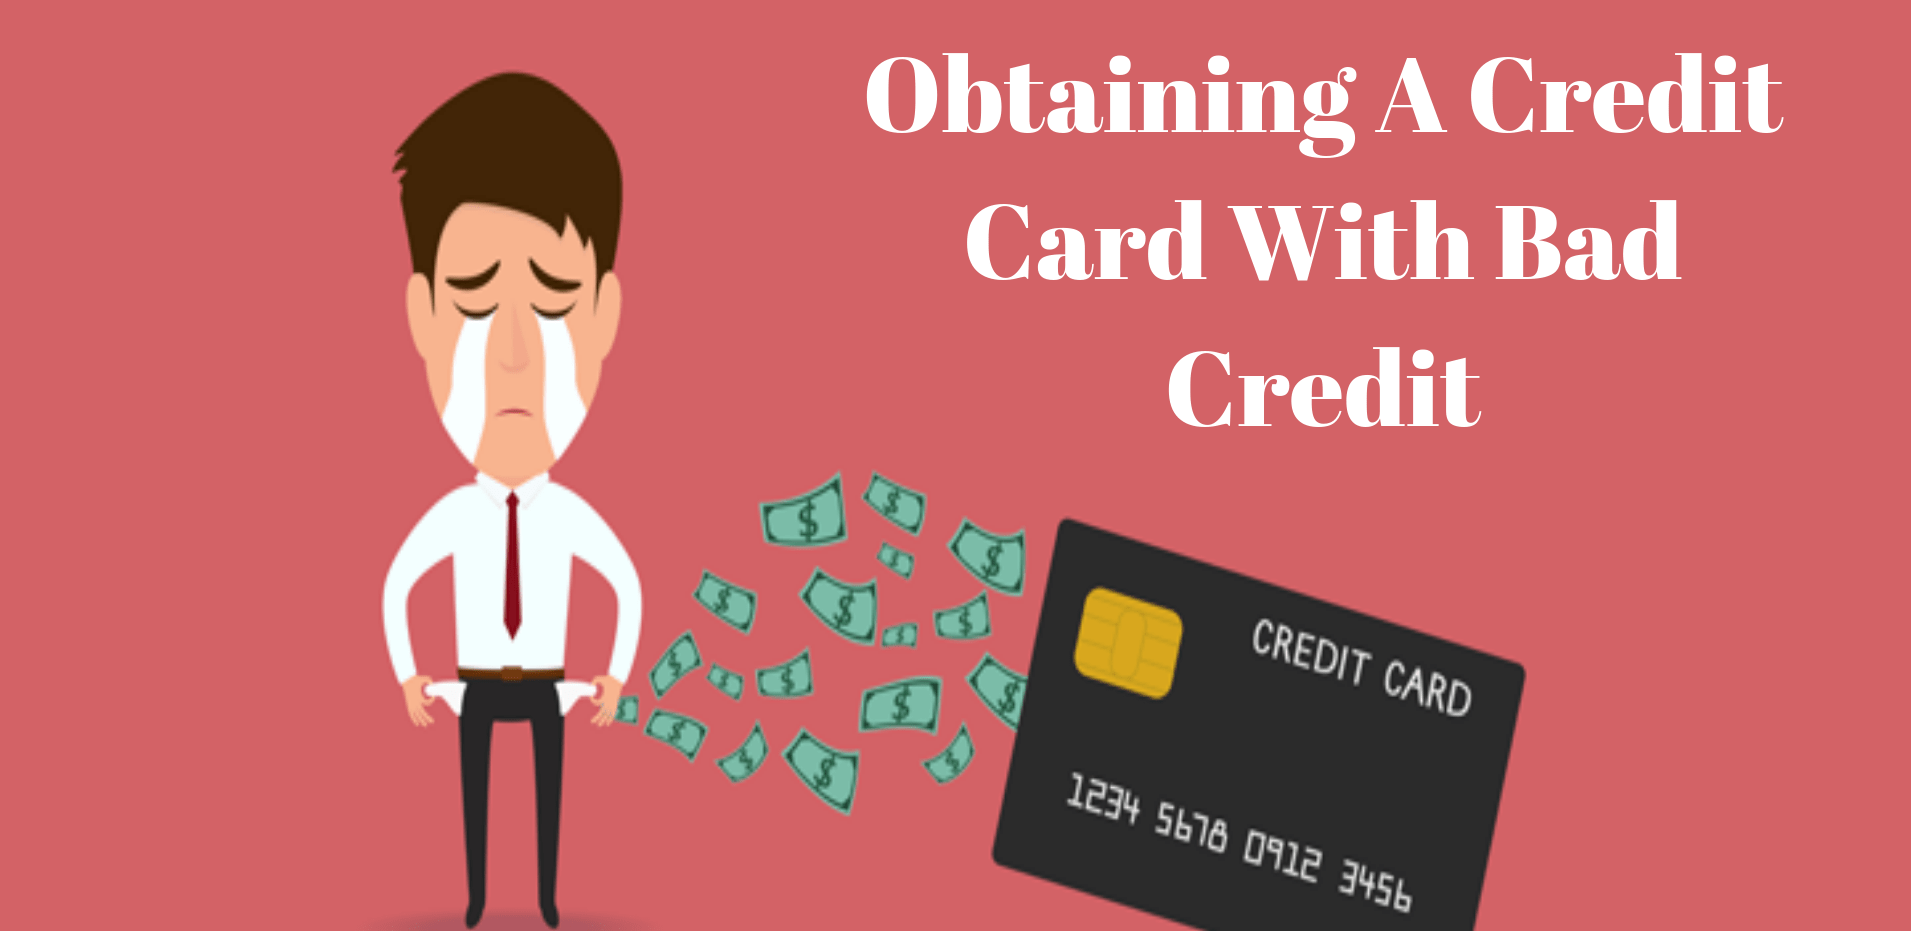 Obtaining A Credit Card With Bad Credit